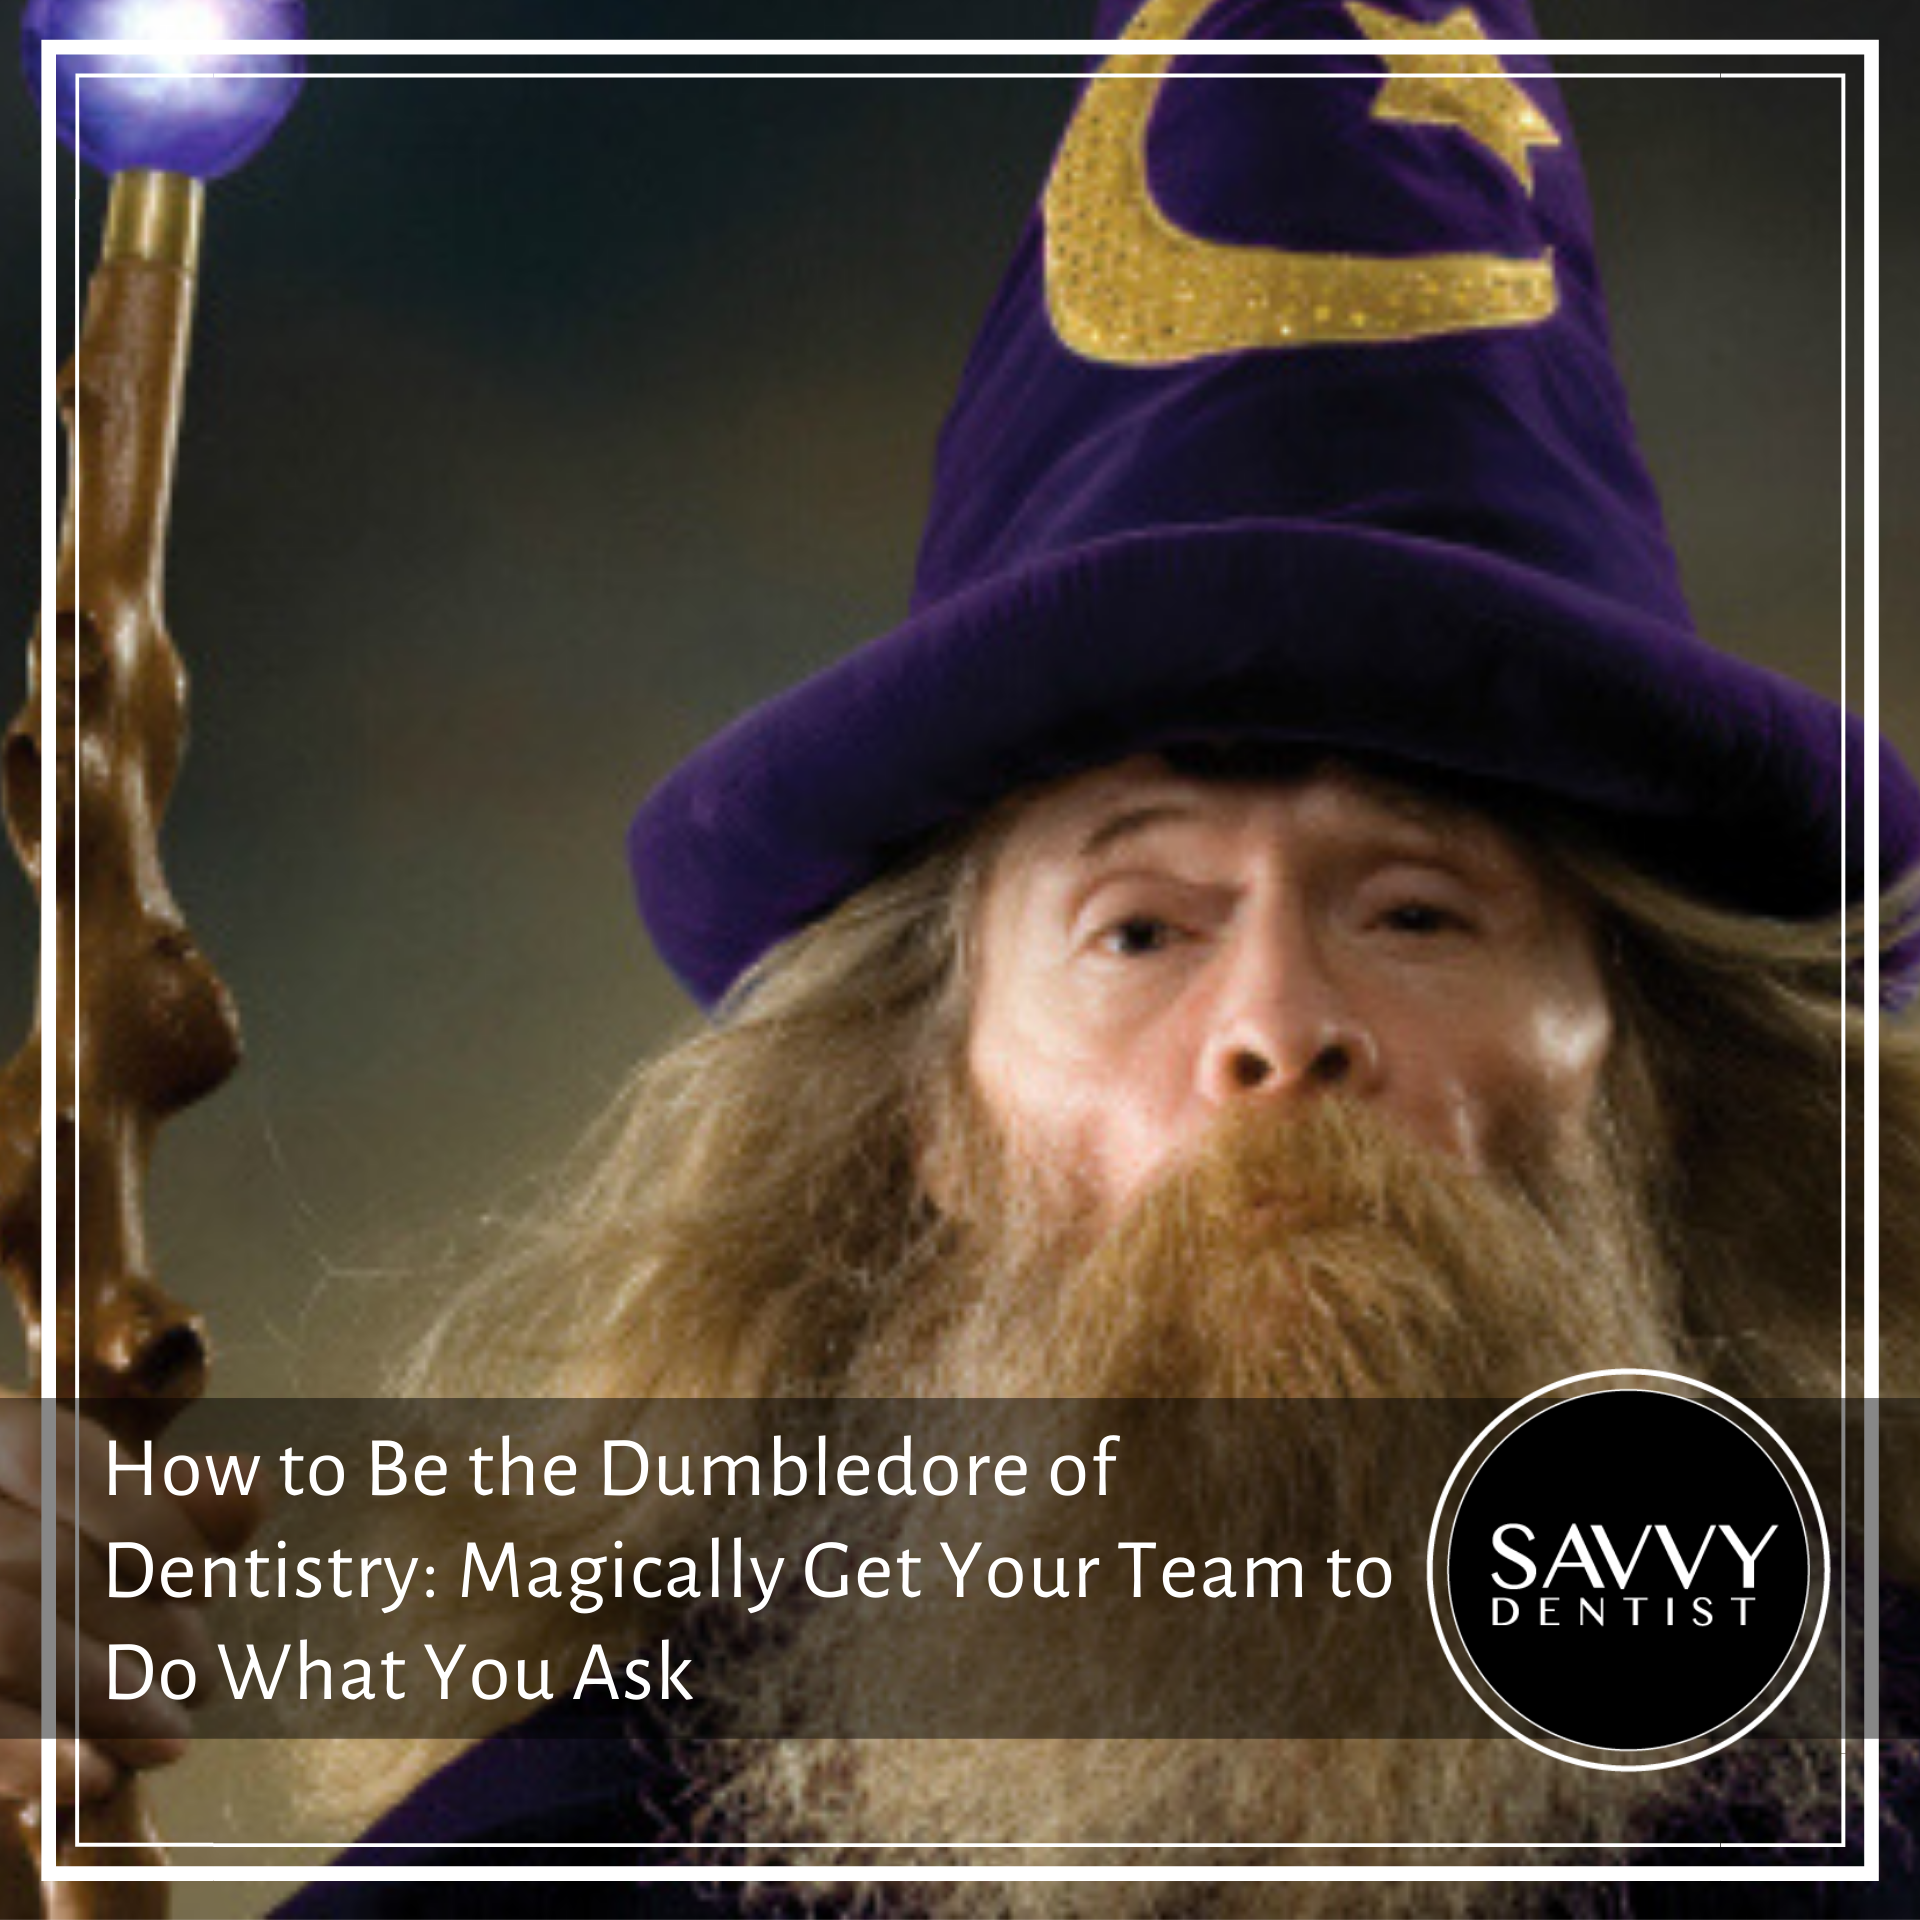 How to Be the Dumbledore of Dentistry: Magically Get Your Team to Do What You Ask